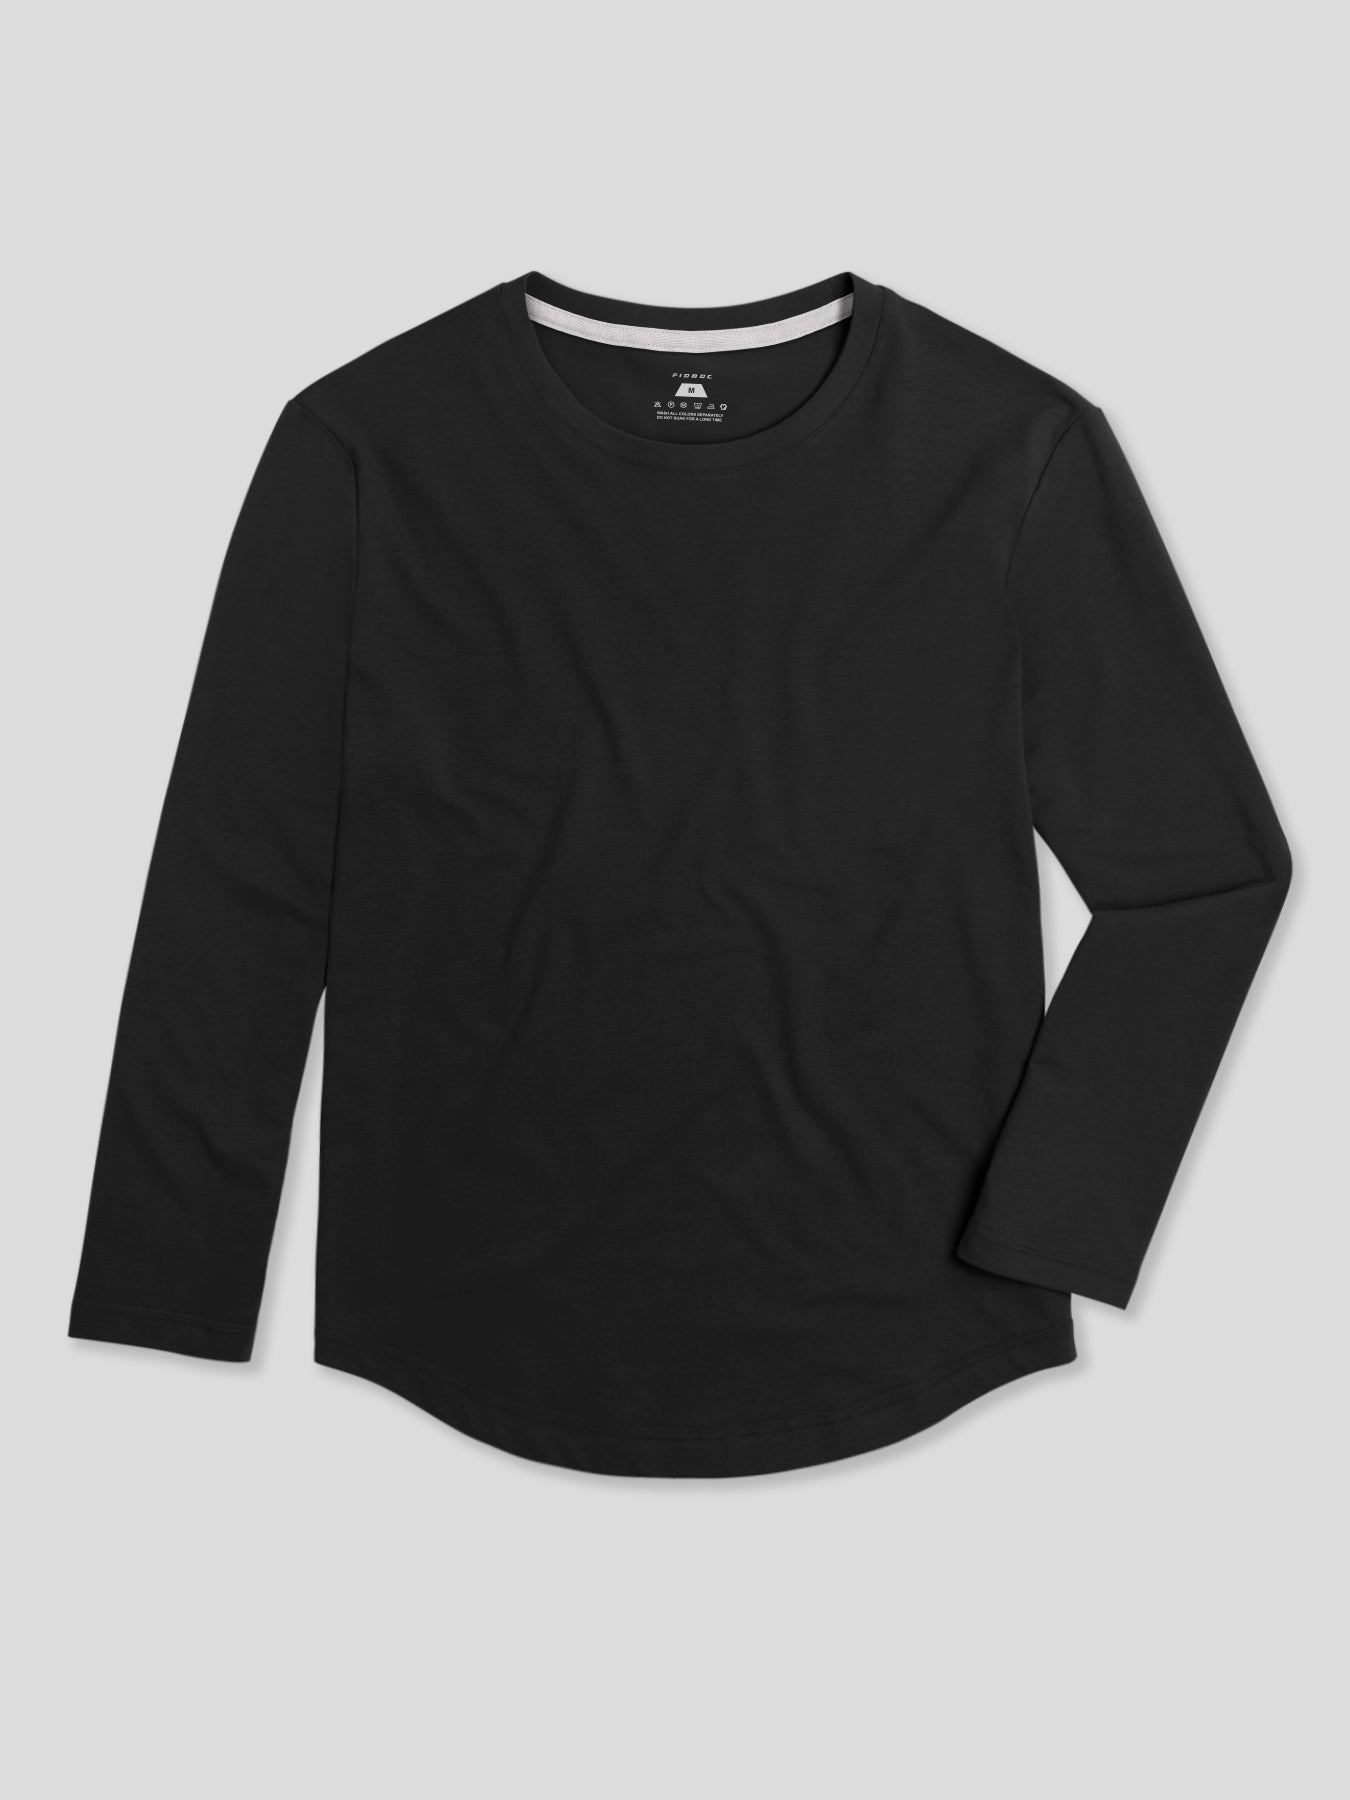 StaySmooth Long Sleeve Elongated Tee:Classic Fit